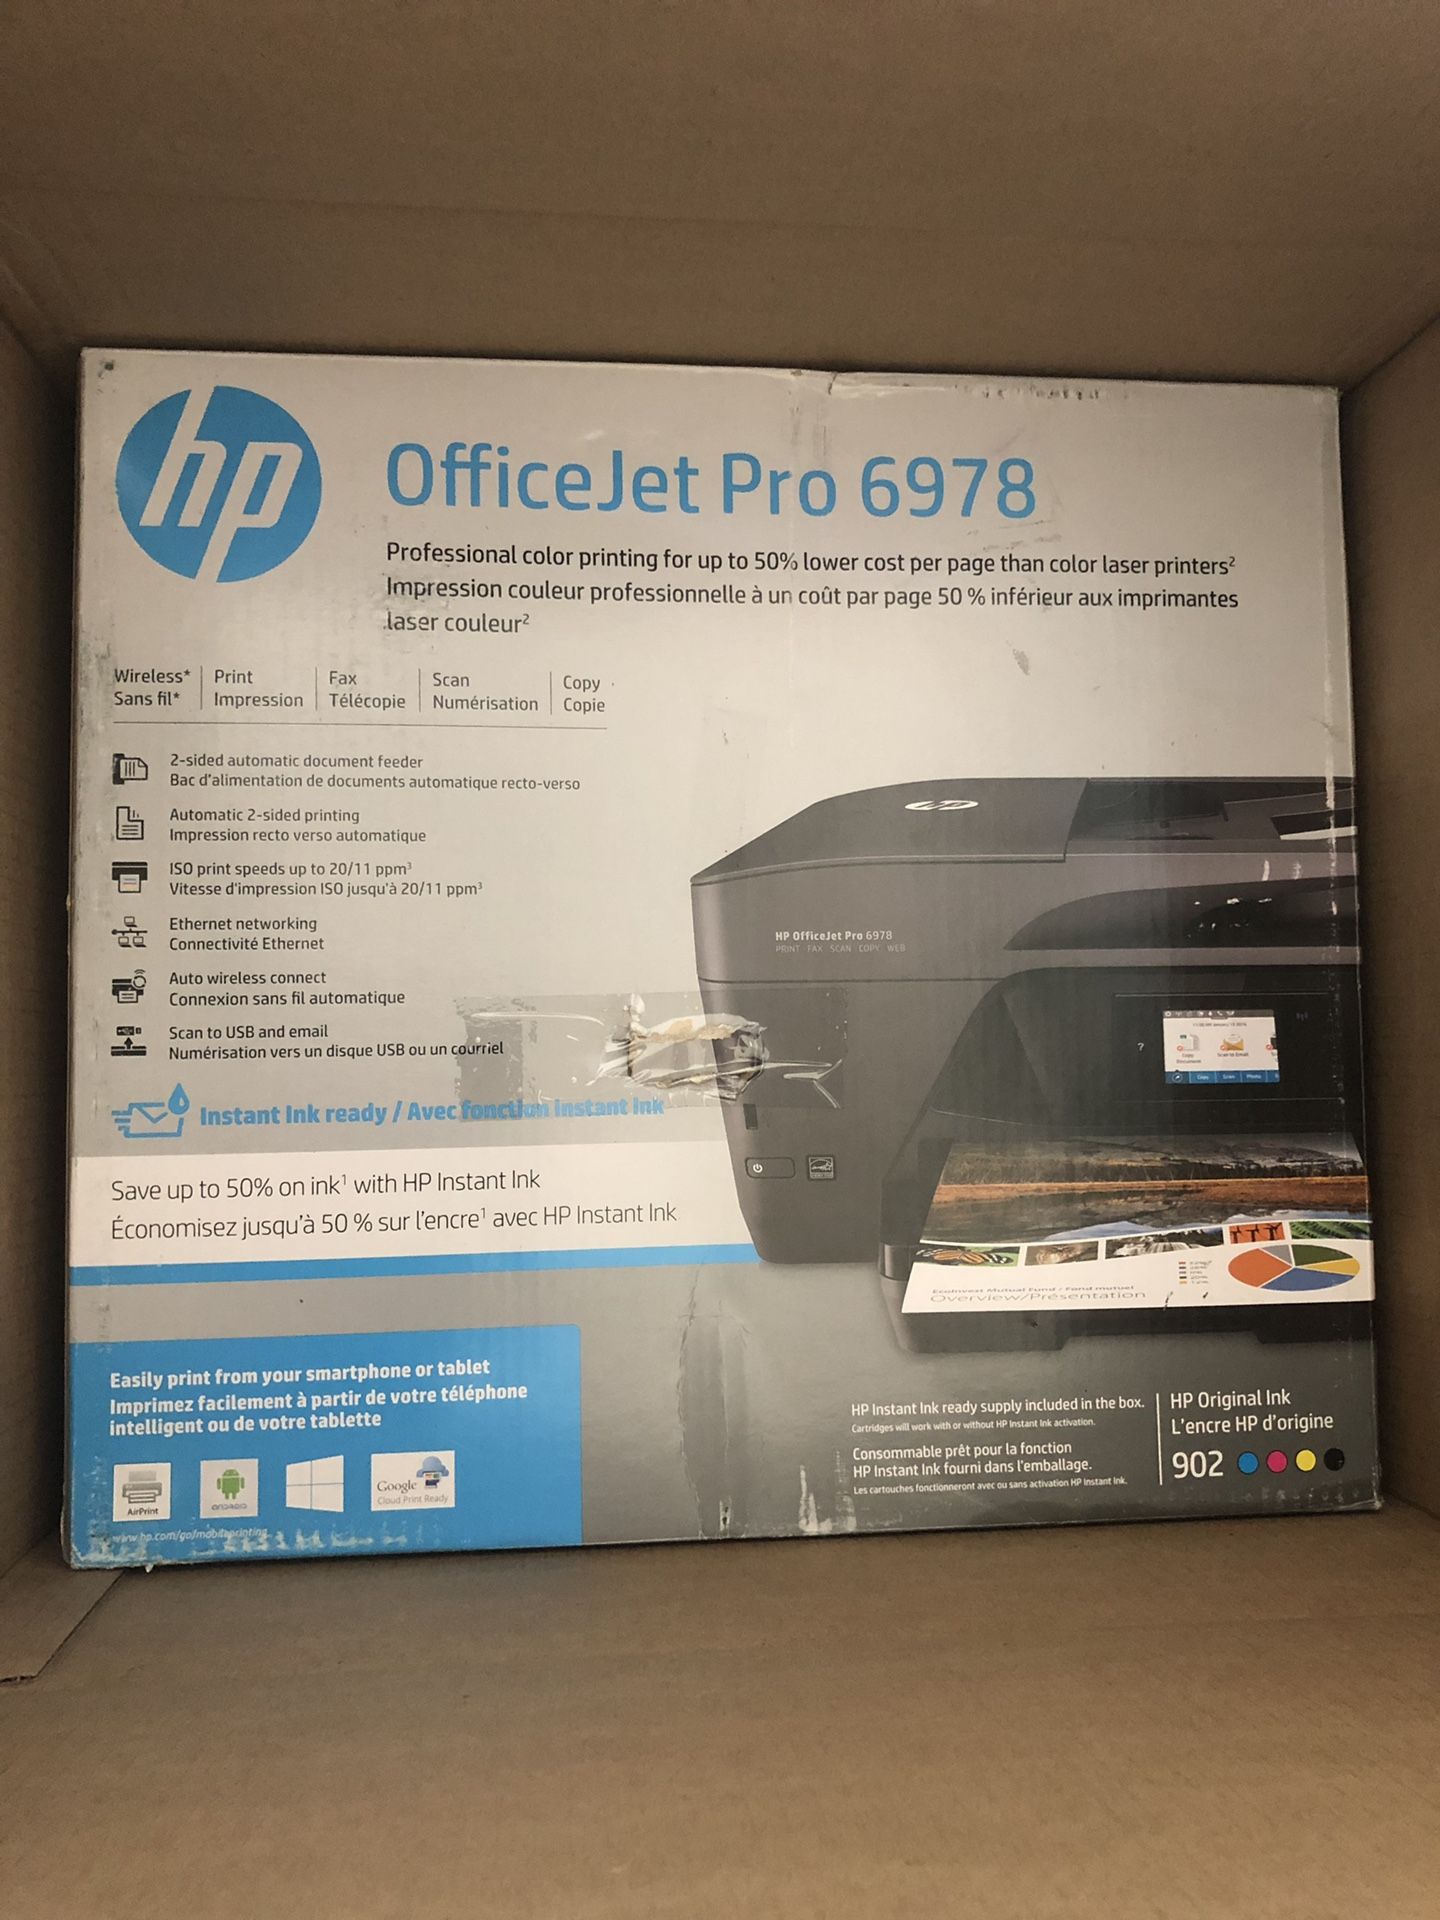 Brand New HP OfficeJet Pro 6978 InkJet All-In-One Printer Wireless Normally Sells for $100 Now for Only $80!!